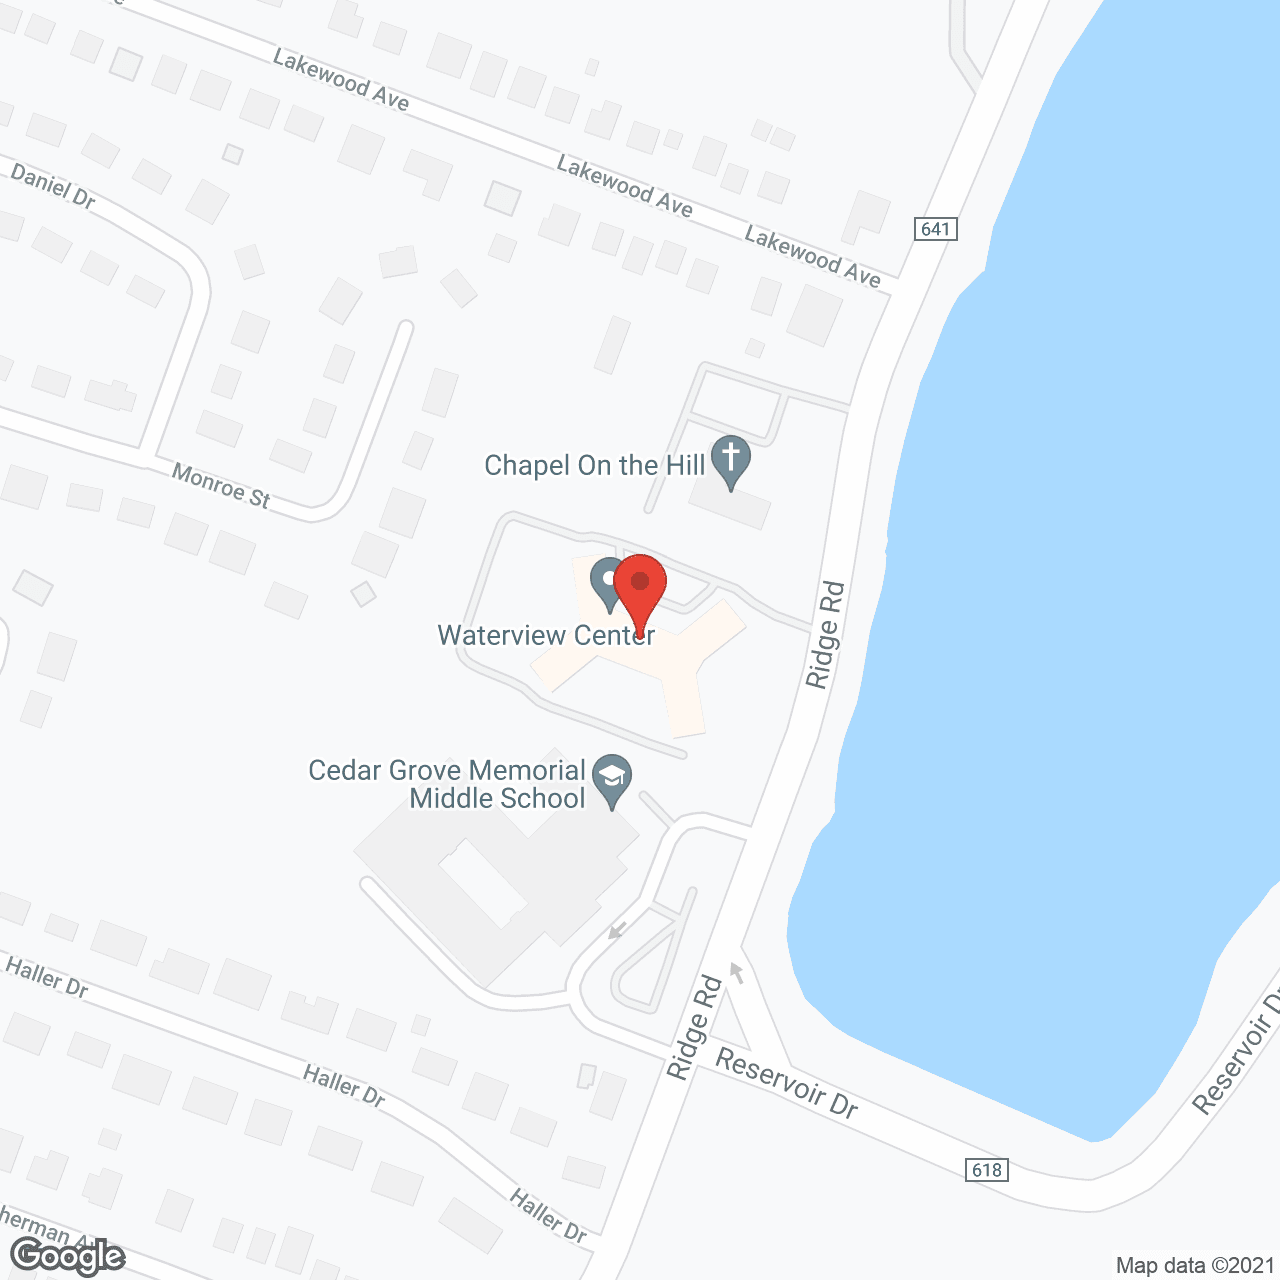 Waterview Center in google map